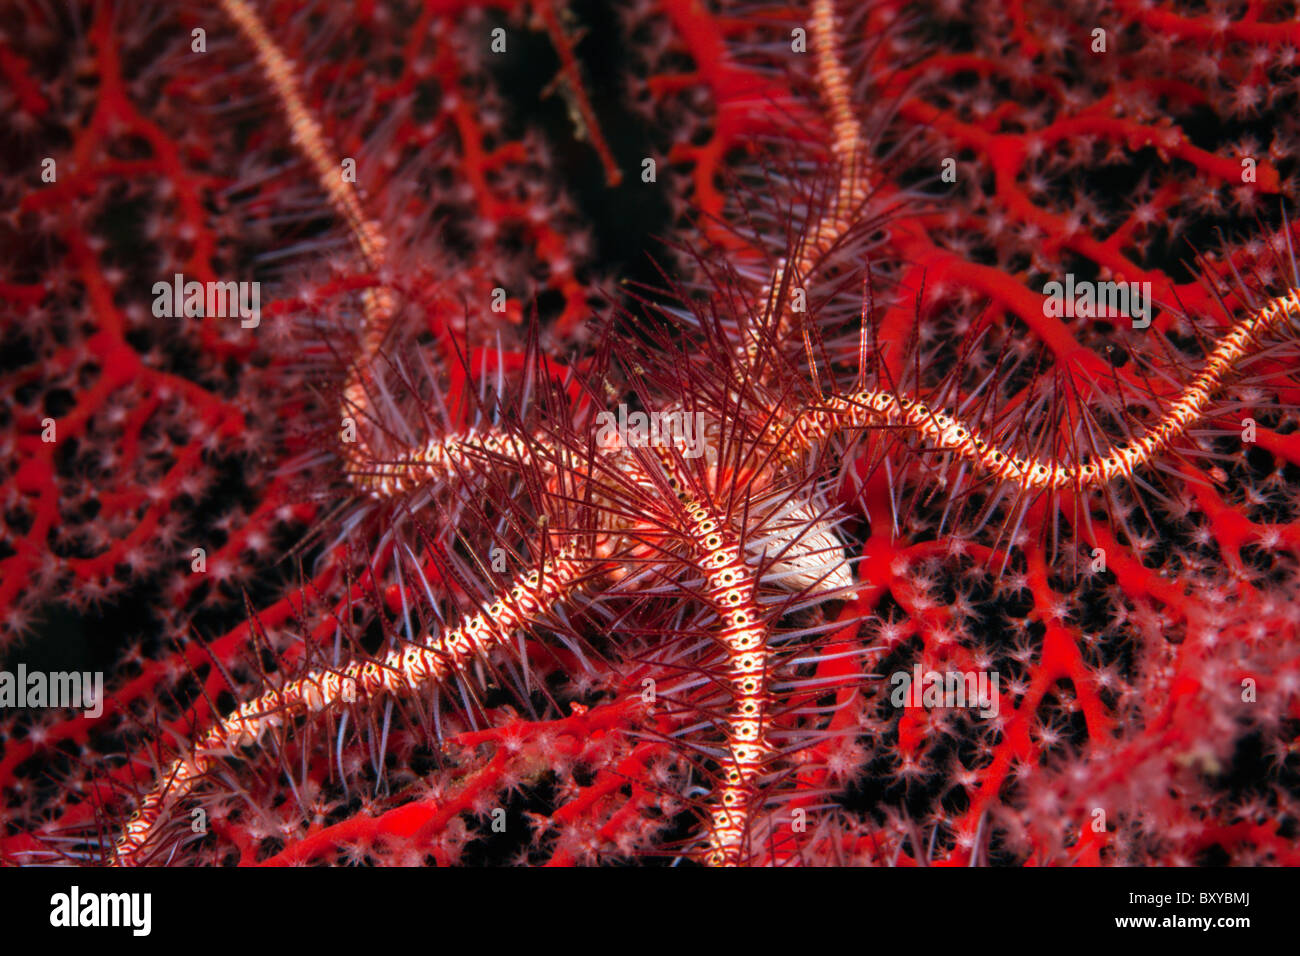 Brittle Star on Seafan, Ophiothrix sp., Candidasa, Bali, Indonesia Stock Photo